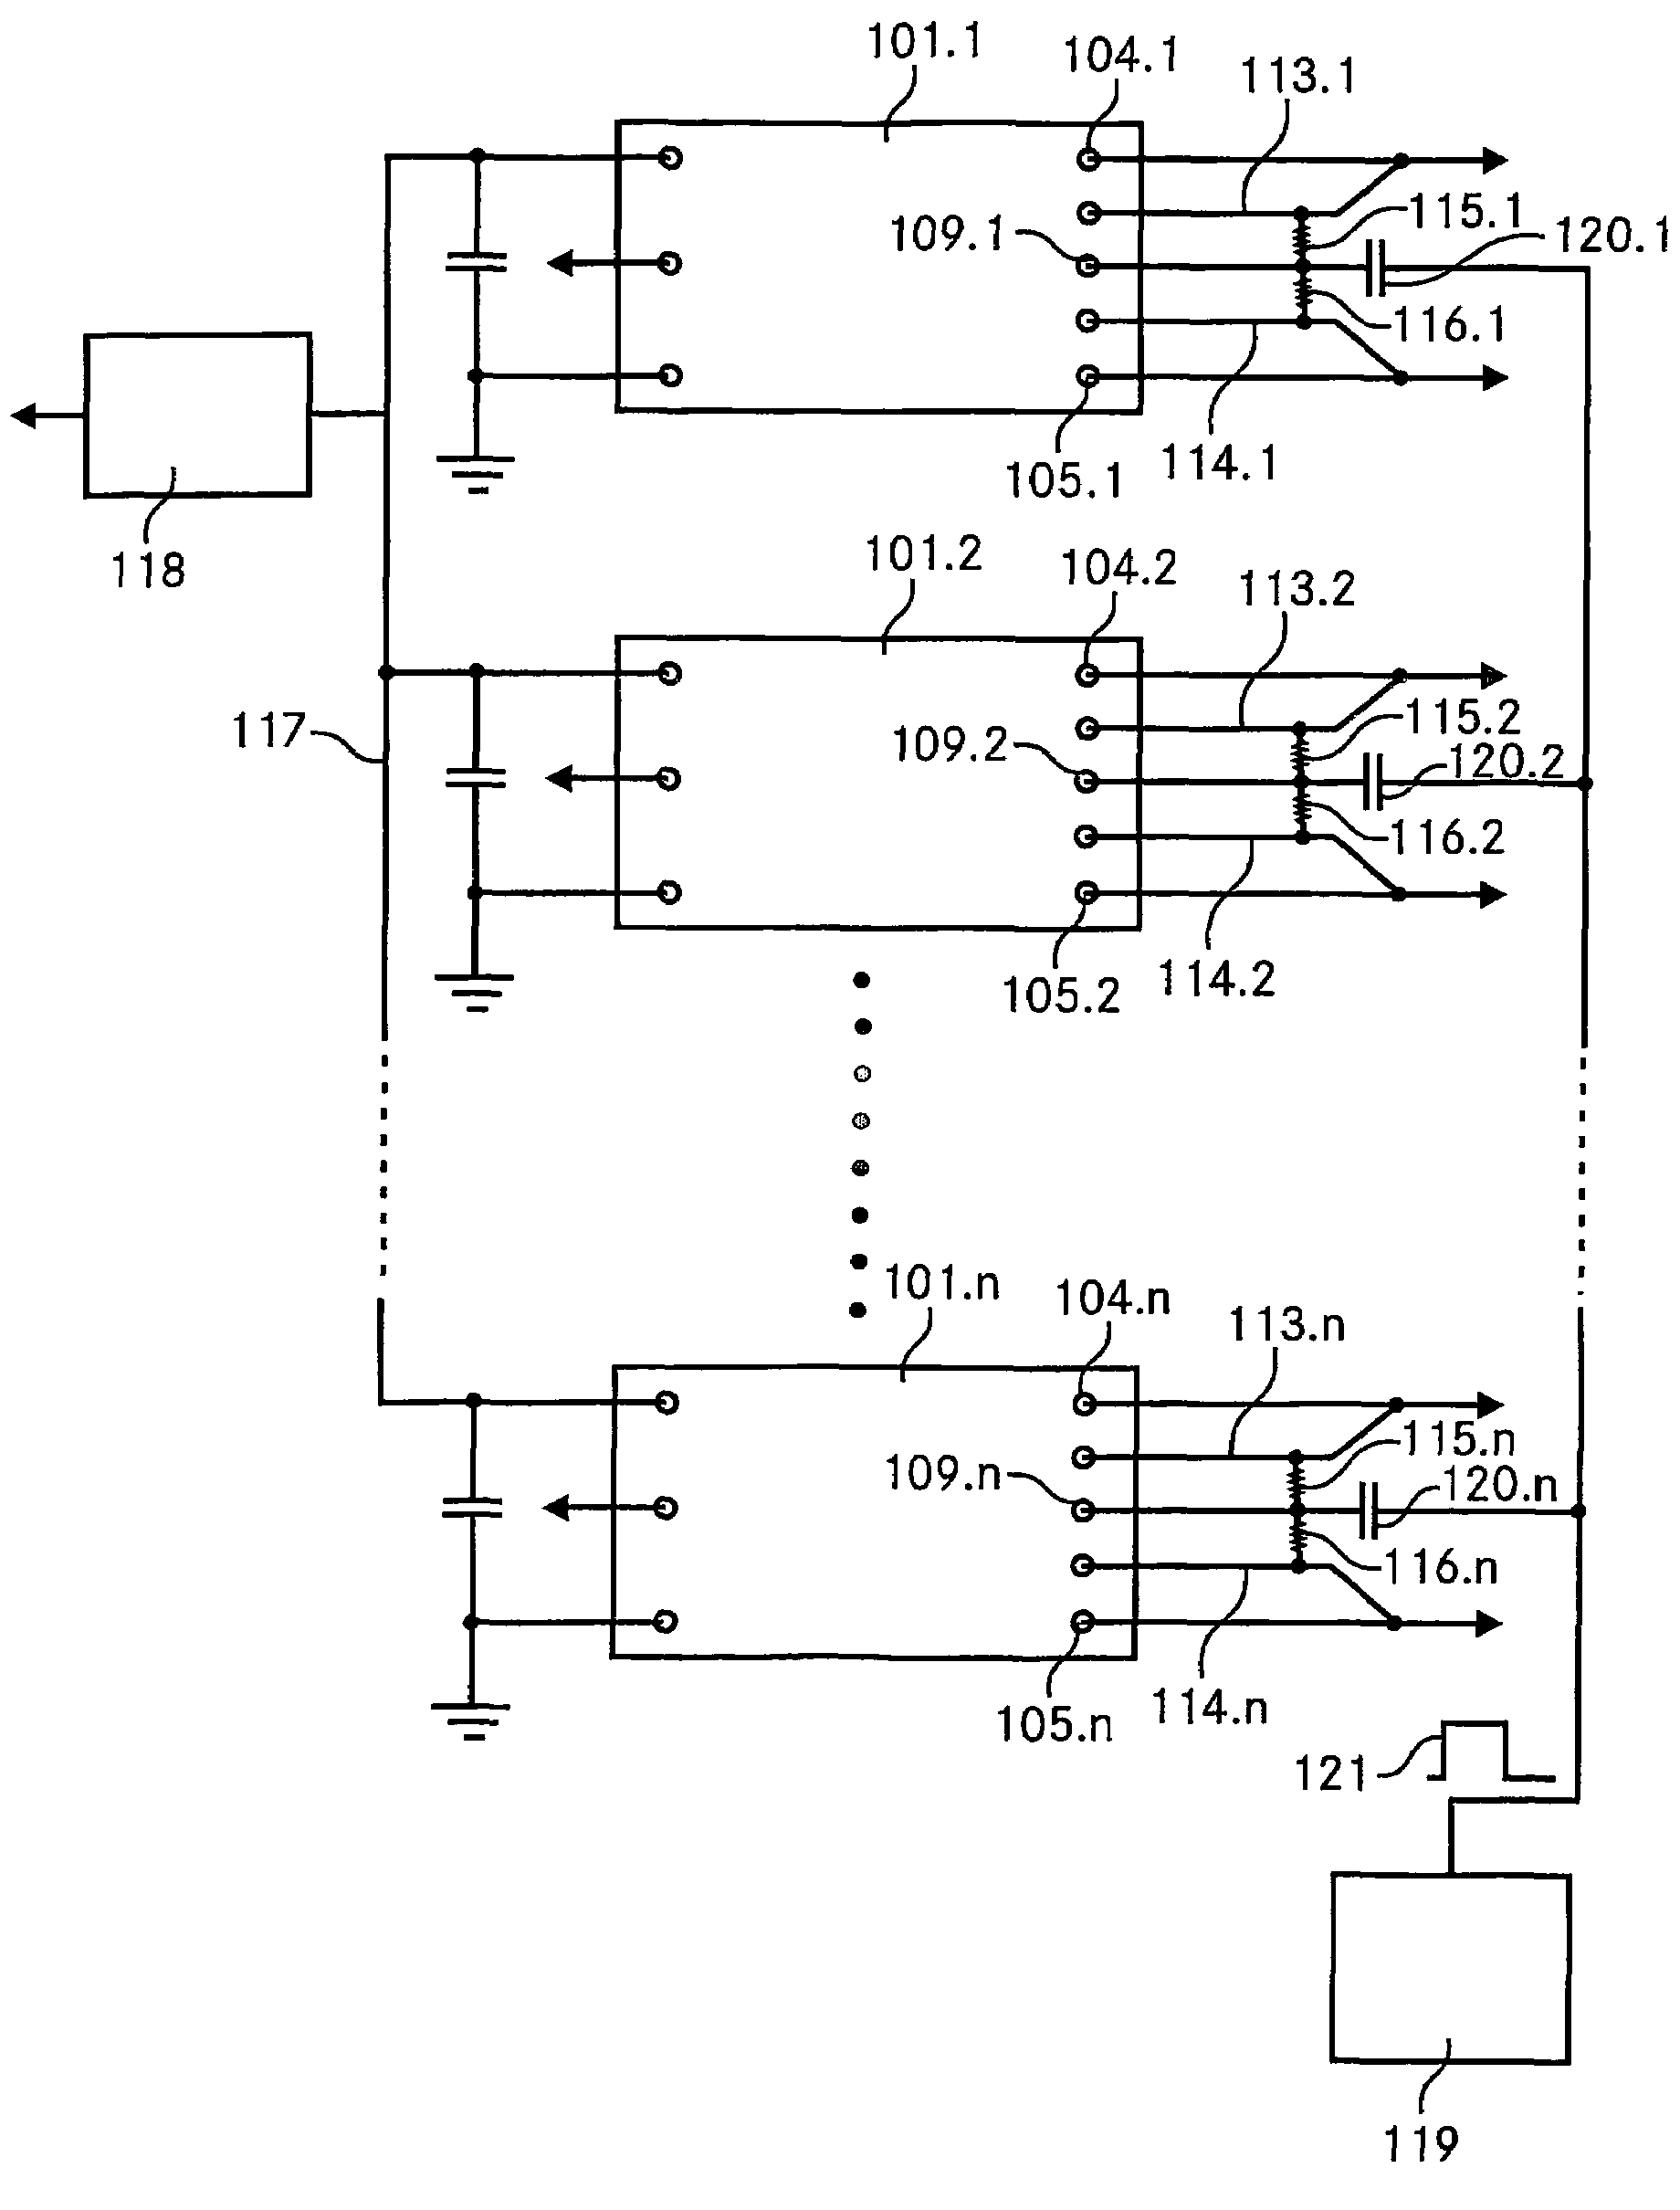 DC-DC switching converter device